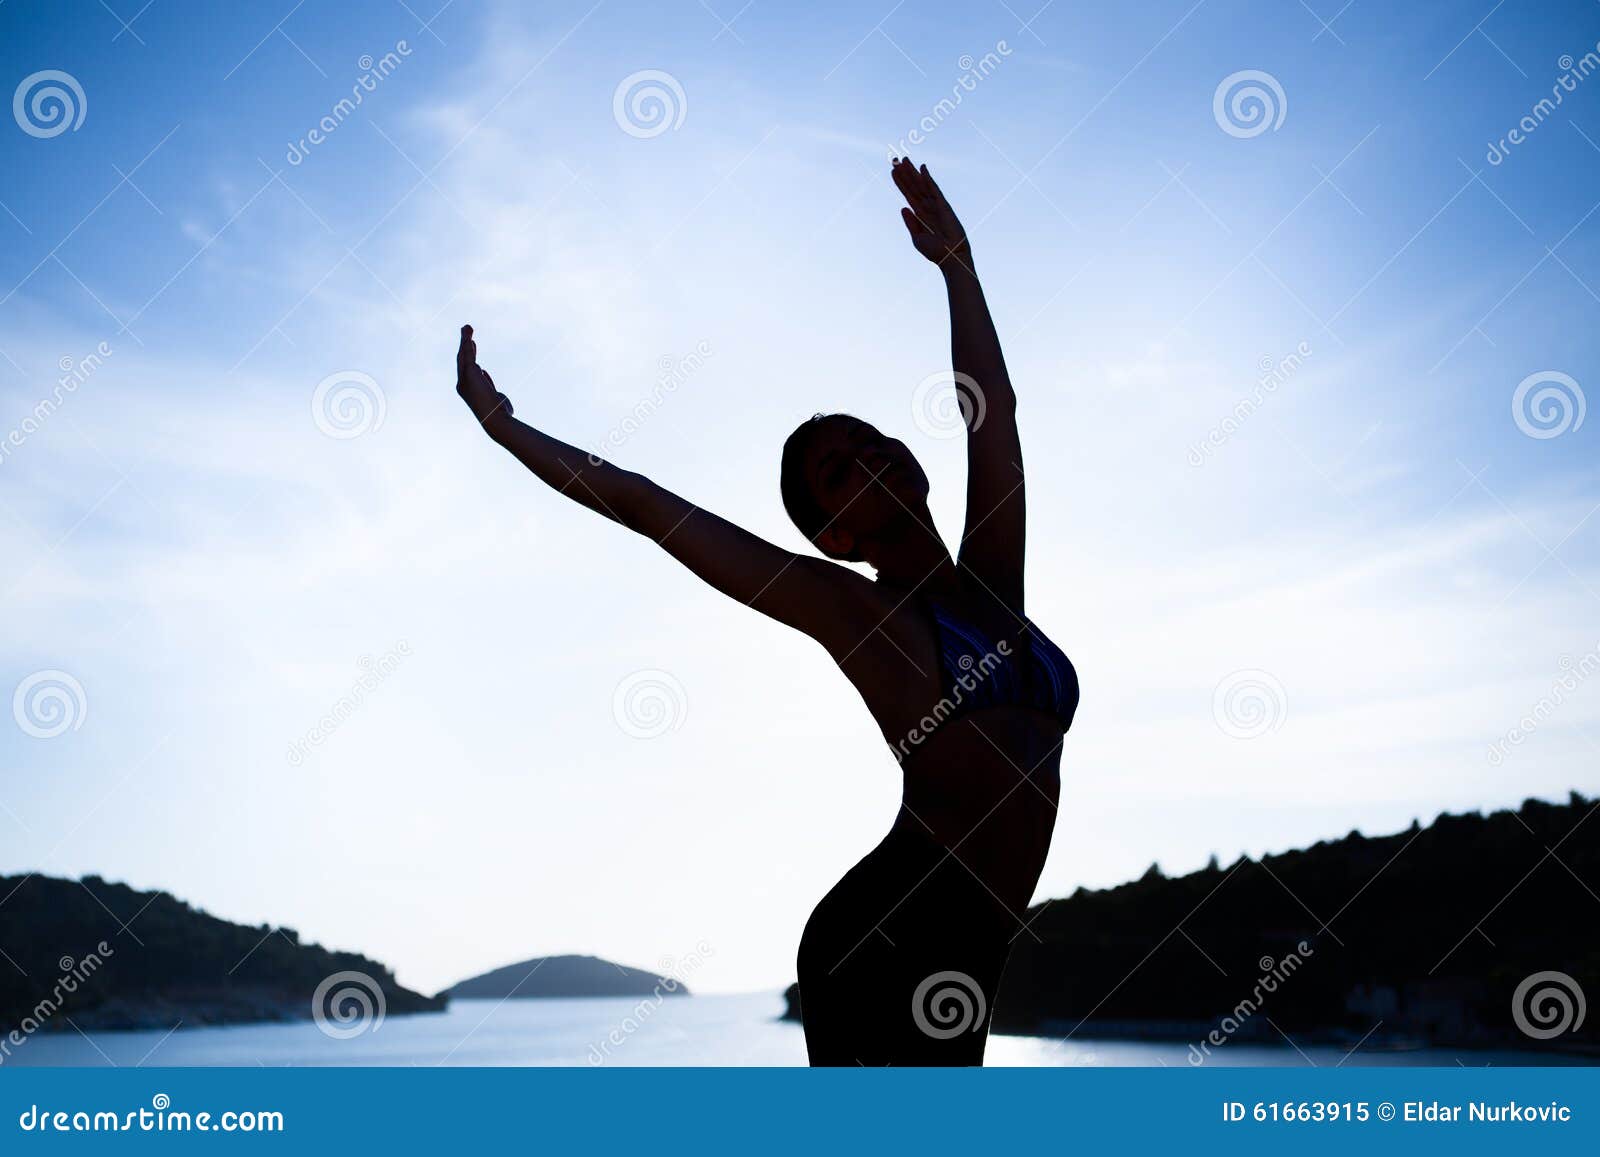 carefree woman dancing.vacation vitality healthy living.free woman embracing the sunshine,enjoying peace,serenity in nature.beauti